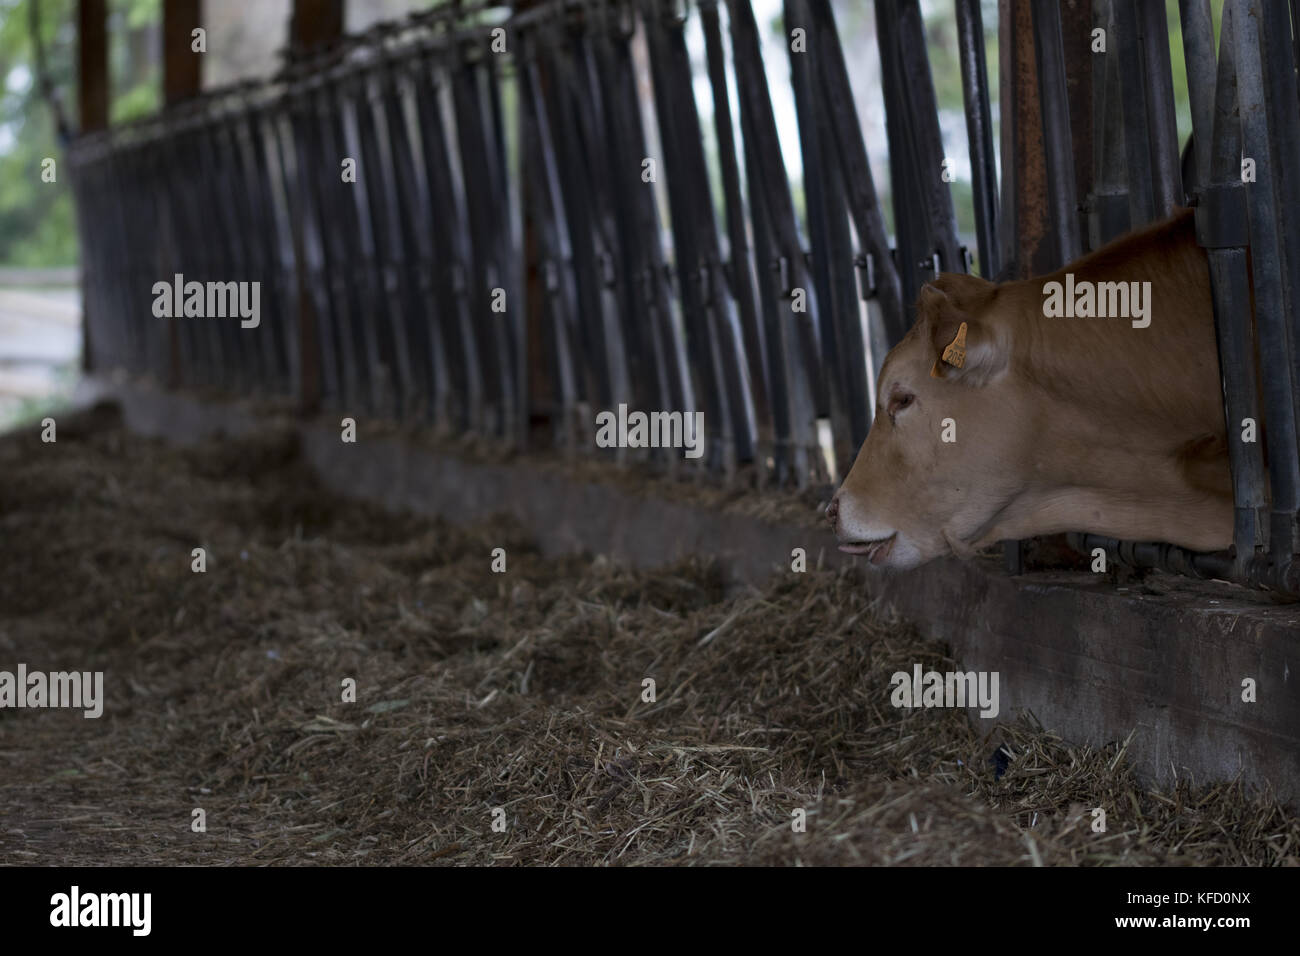 young Ayrshire cattle eating hay in a shed Stock Photo